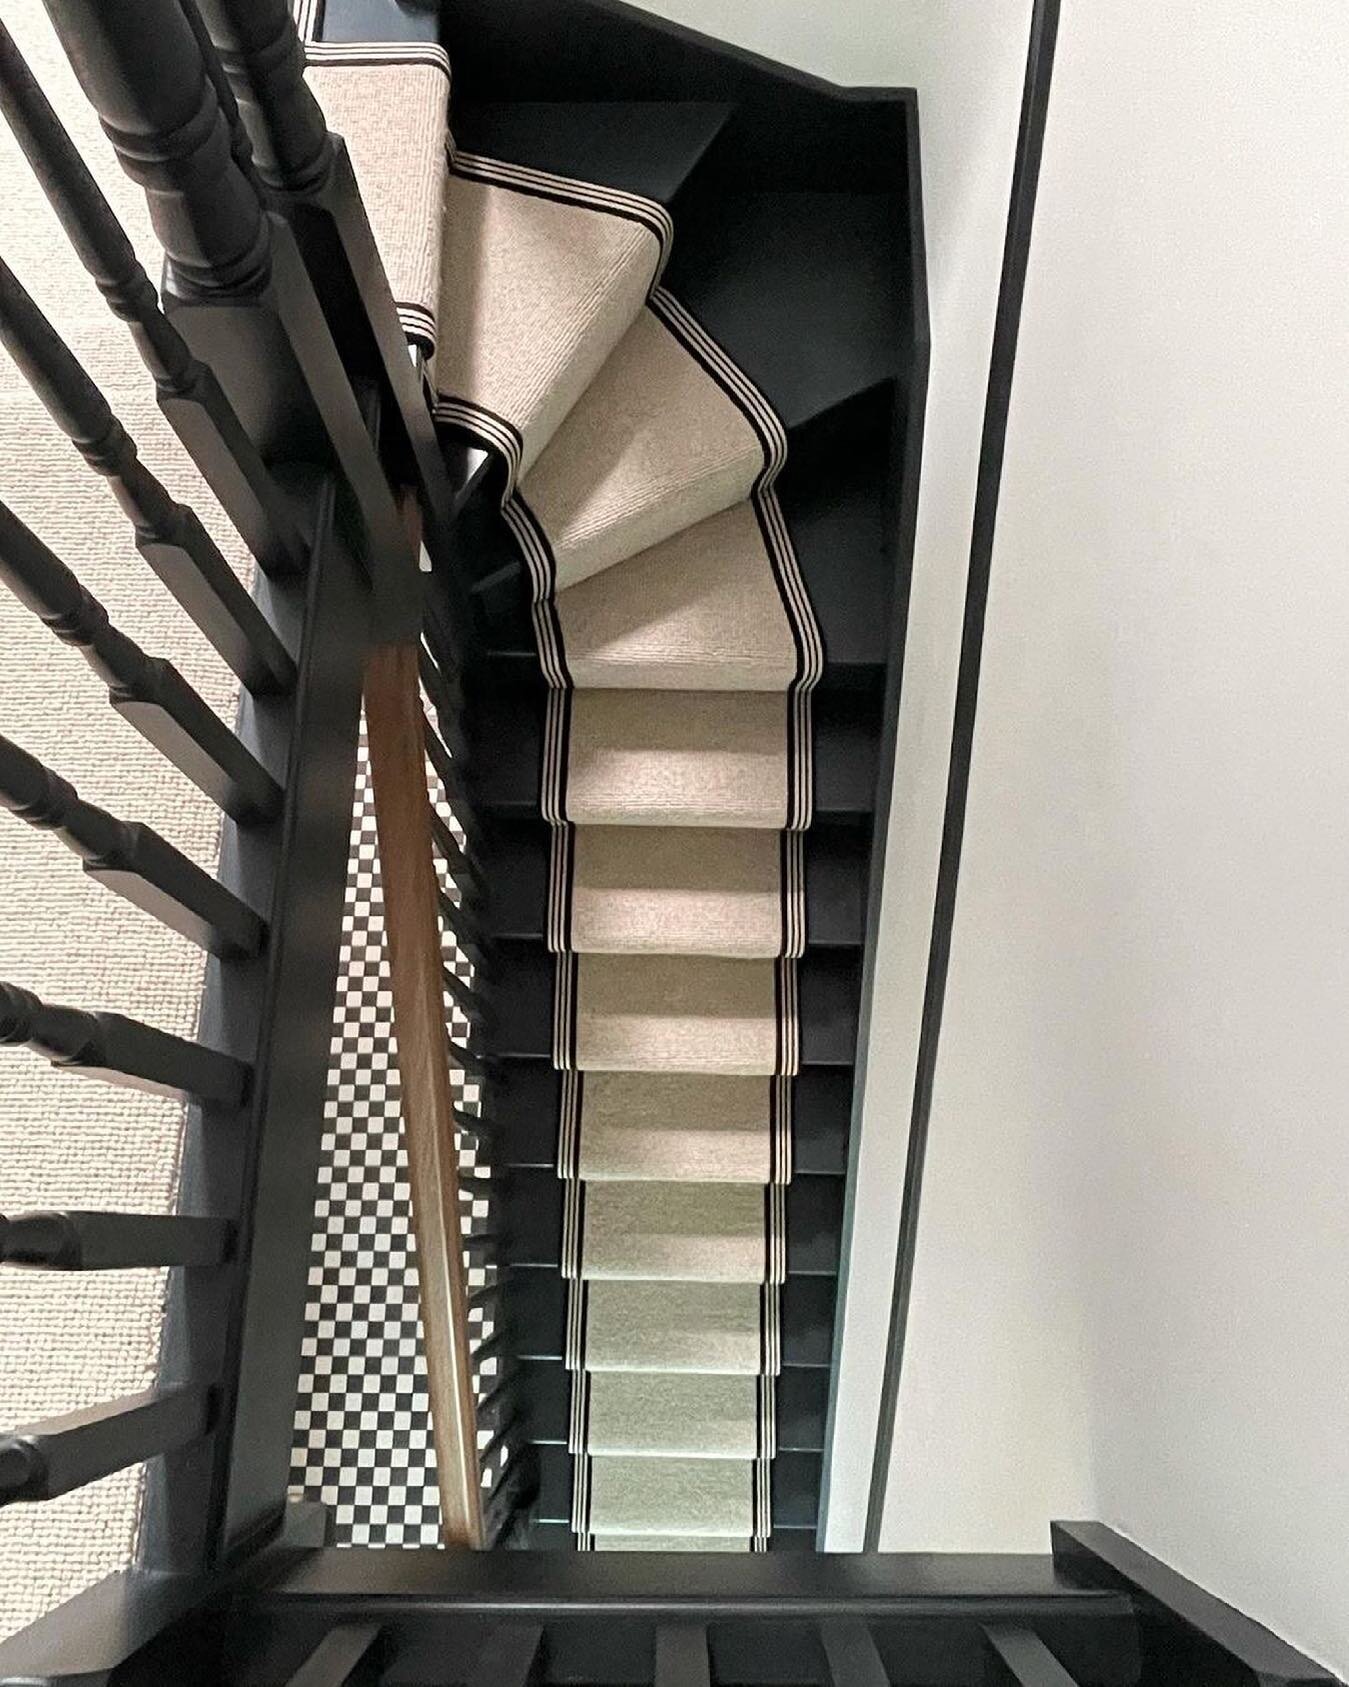 Decorating with a stair runner means that you can add colour and texture to your interior while allowing the sophistication of your dark-hued stairway to shine through.⁣⁣⁣⁣

Here, @bearsden_lodge - one of our favourite interior accounts - chose a neu